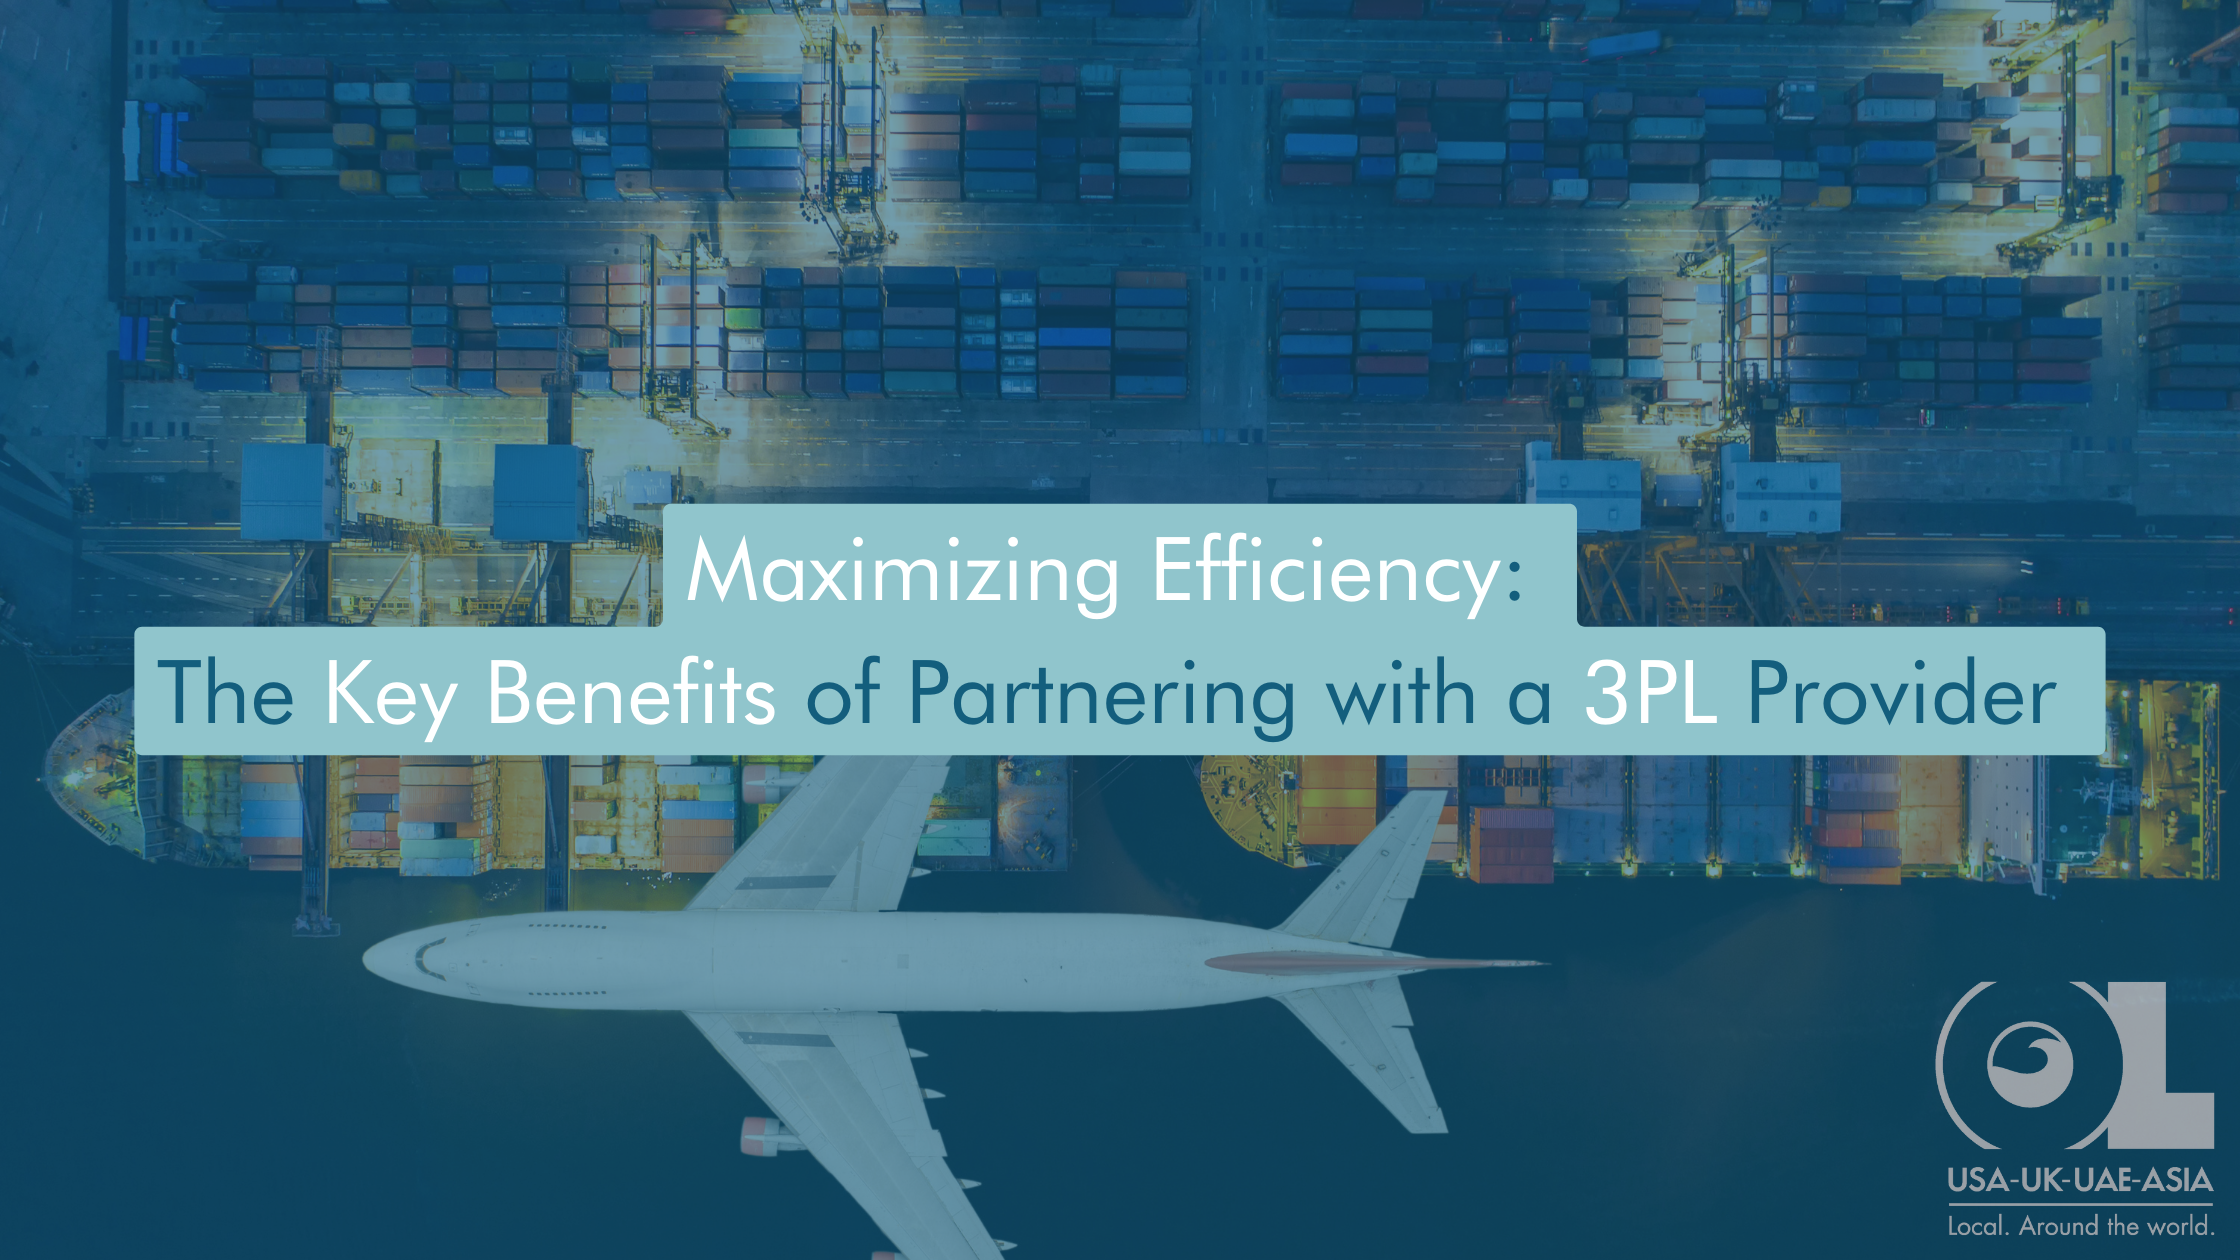 Maximizing-Efficiency-The-Key-Benefits-of-Partnering-with-a-3PL-Provider-OL-USA